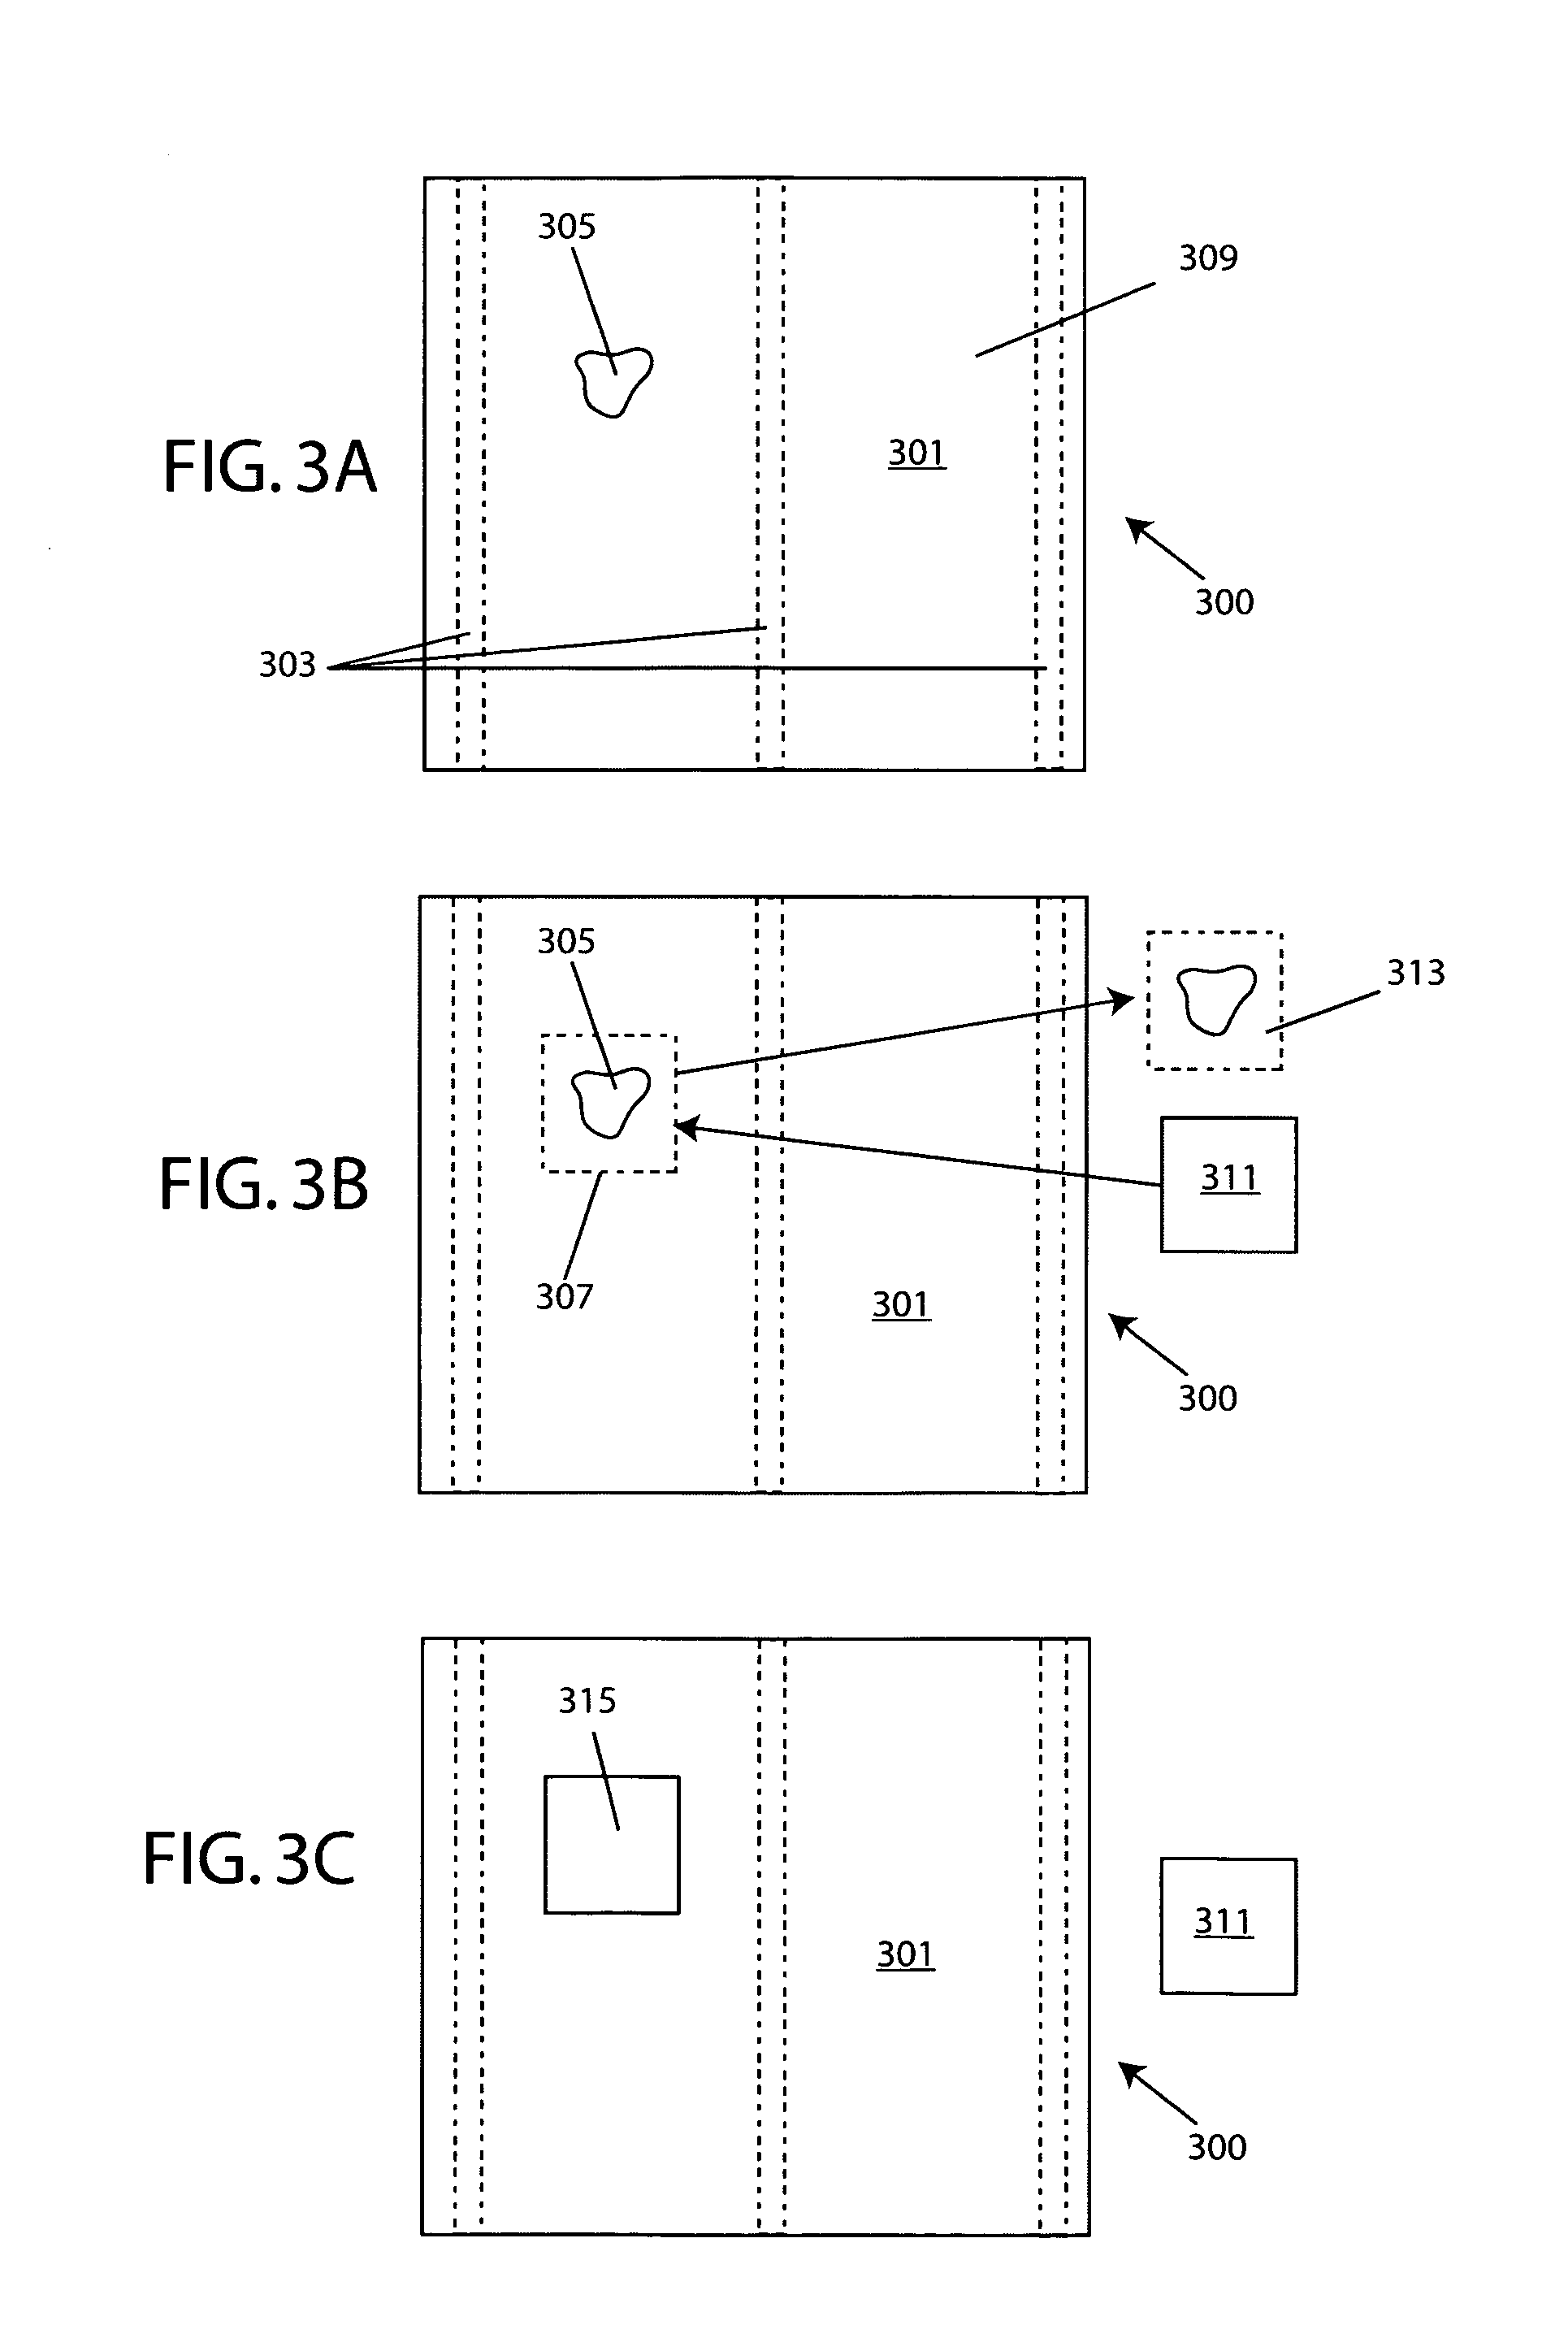 Multipurpose apparatus for mounting objects and repairing drywall